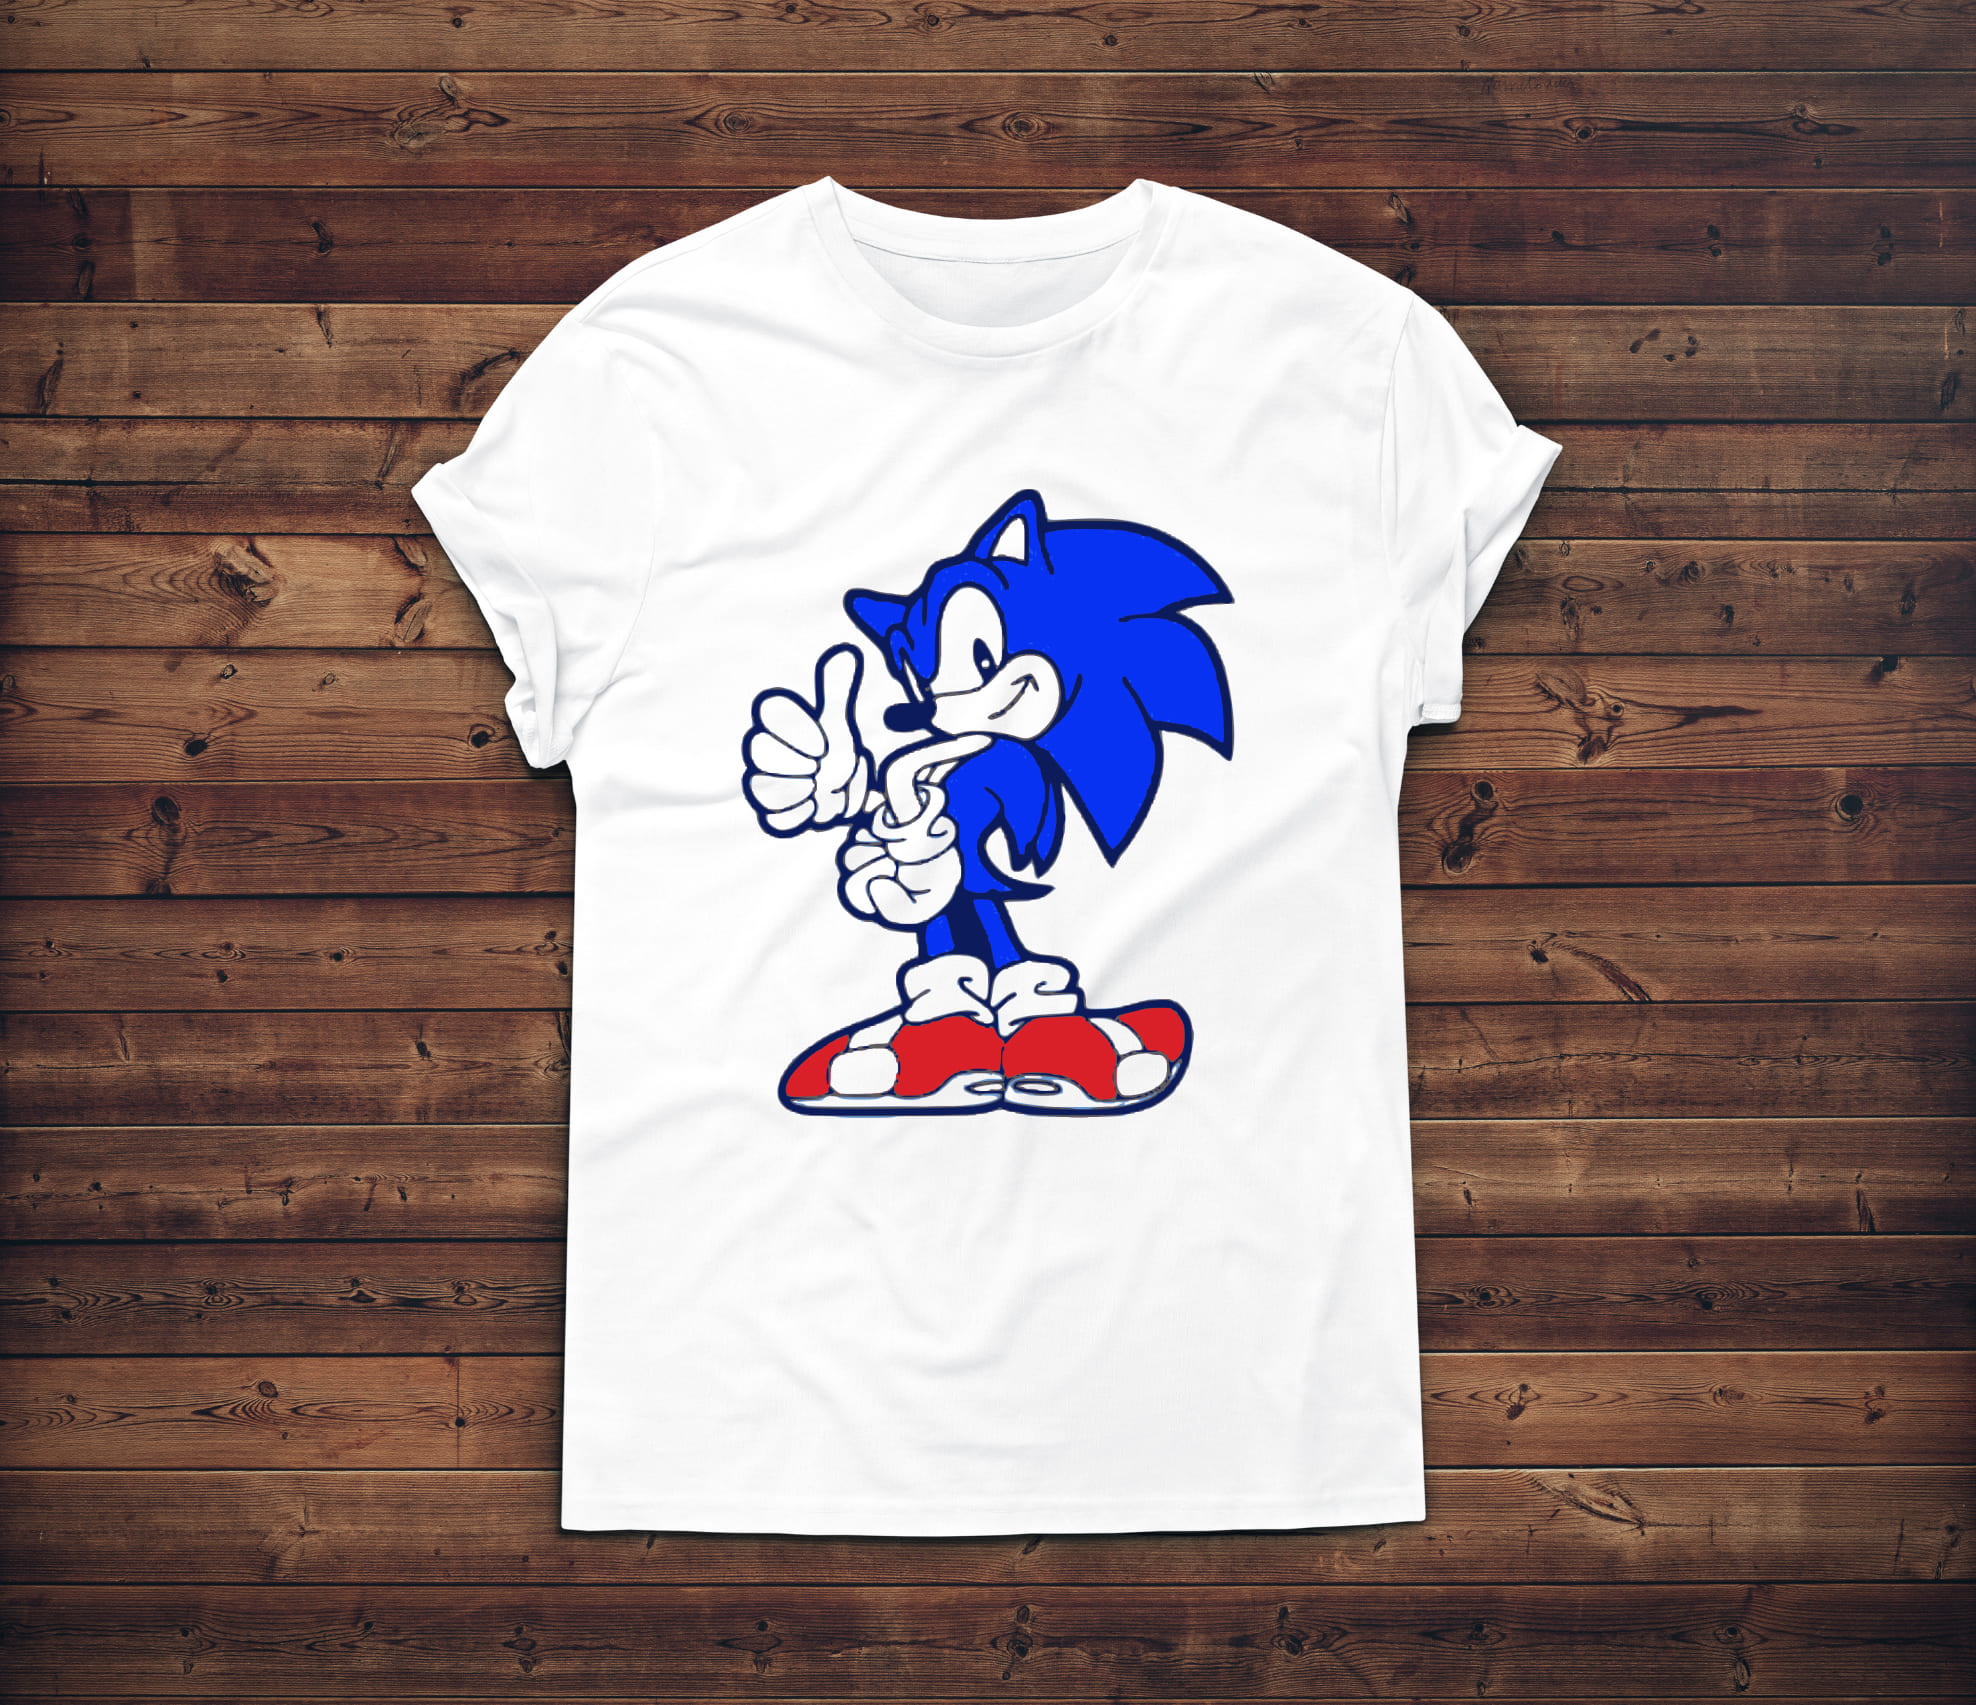 Funny Sonic for your t-shirt.